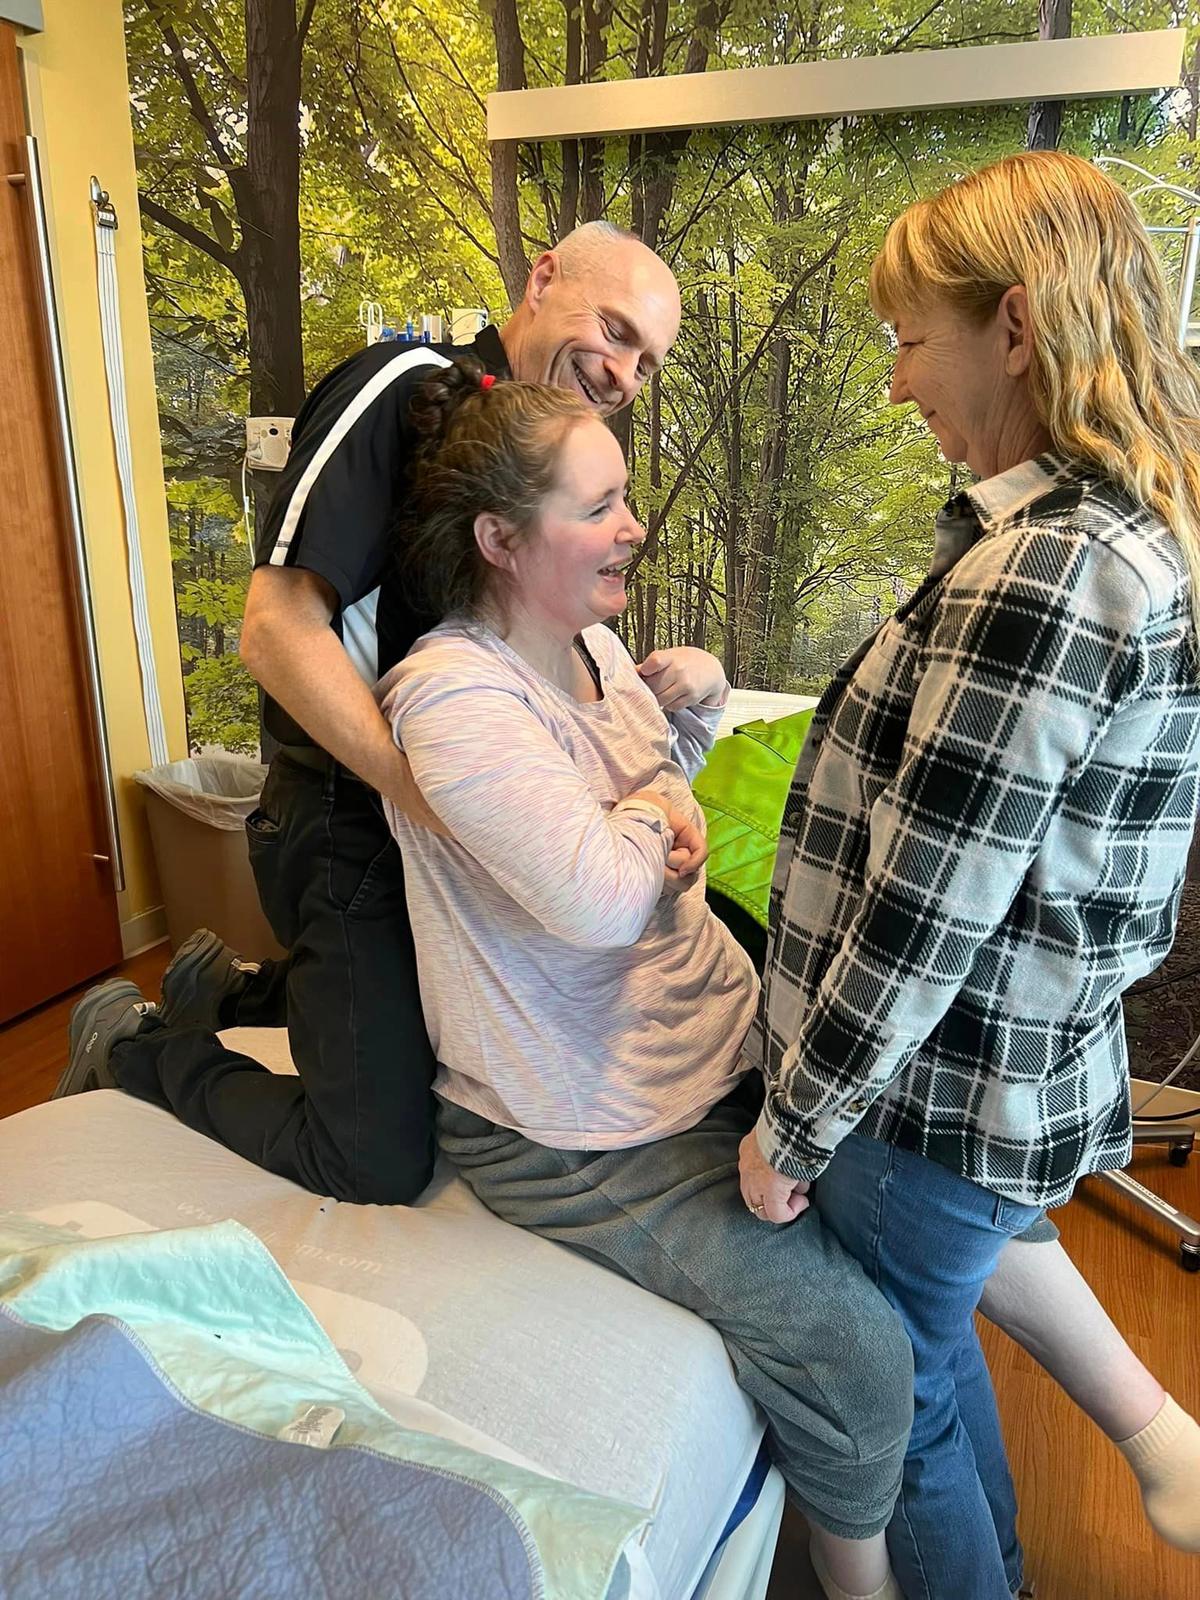 (L-R): A therapist at Mary Free Bed, Ms. Flewellen receiving therapy, and her mom, Ms. Means. (Courtesy of <a href="https://www.facebook.com/profile.php?id=61554133355459">Jenn’s Journey: A Miracle in the Making</a>)